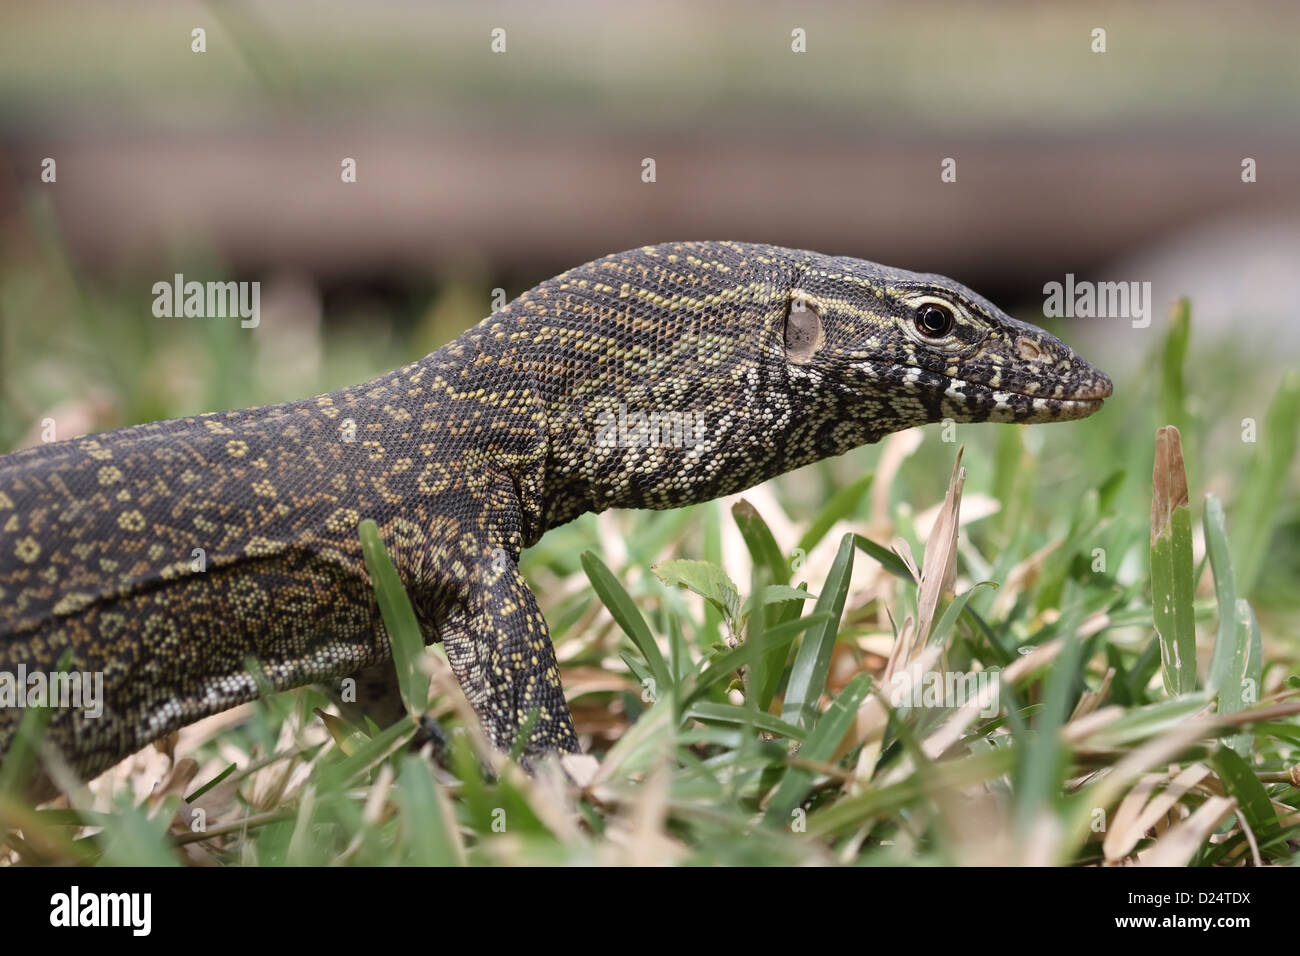 Nile Monitor (Varanus niloticus) immature, close-up of head and front legs, Gambia, february Stock Photo